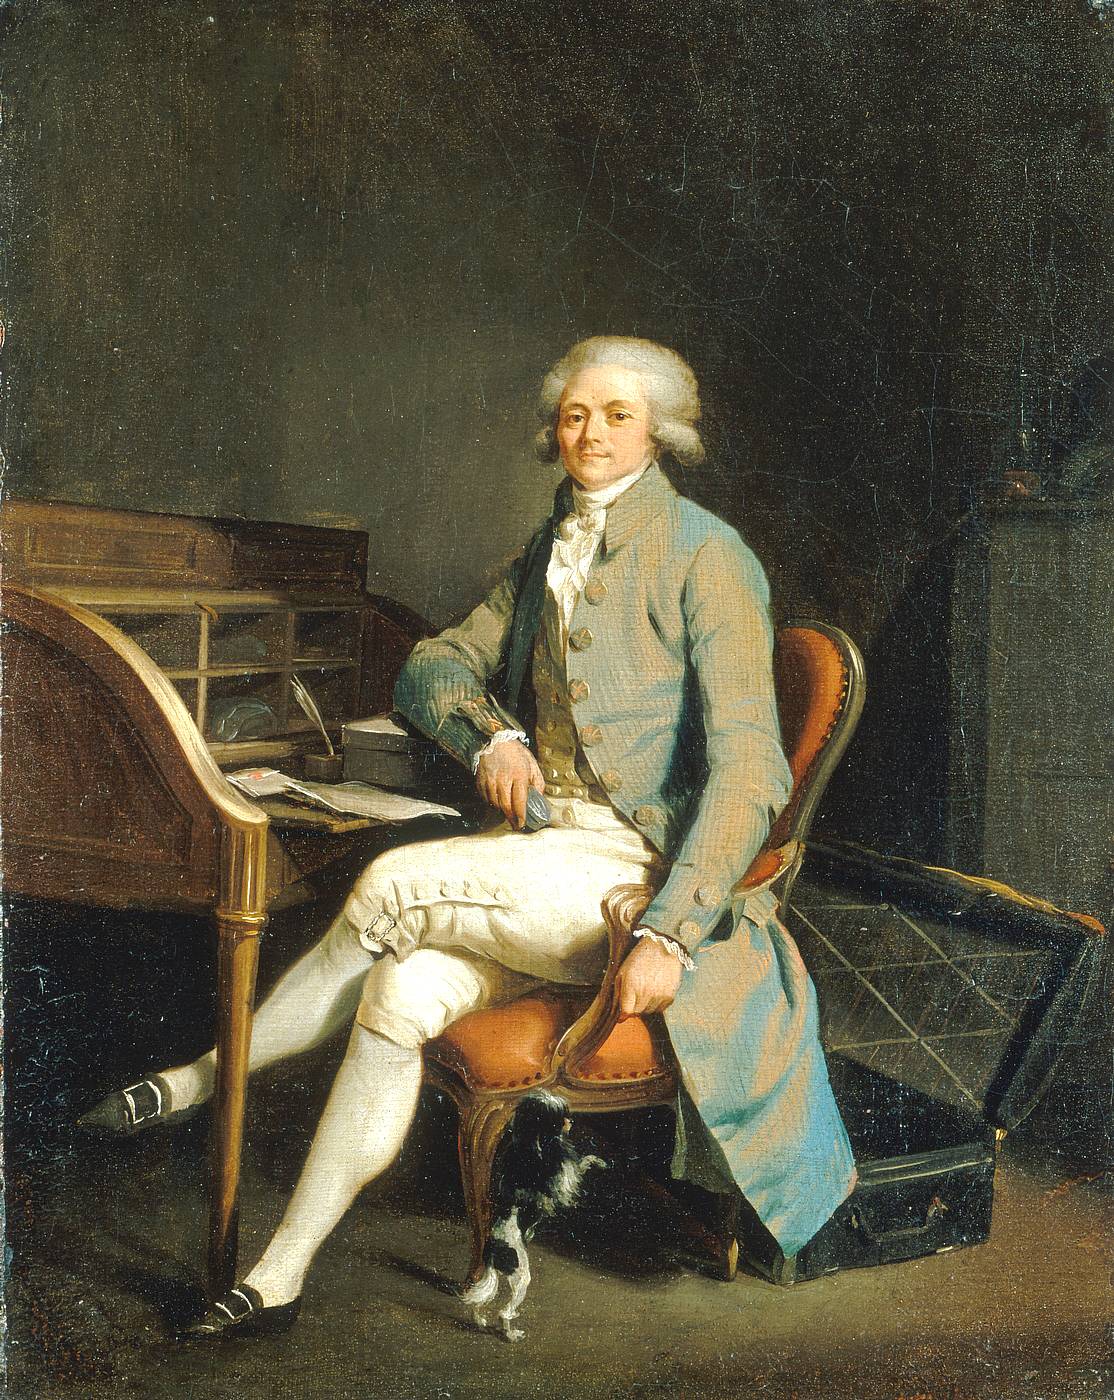 "Any law which violates the unalienable rights of man is essentially unjust and tyrannical; it is not a law at all." <i>â€“Maximilien Robespierre (1758-1794, French politician, executed without trial thousands of suspected non-supporters)</i>